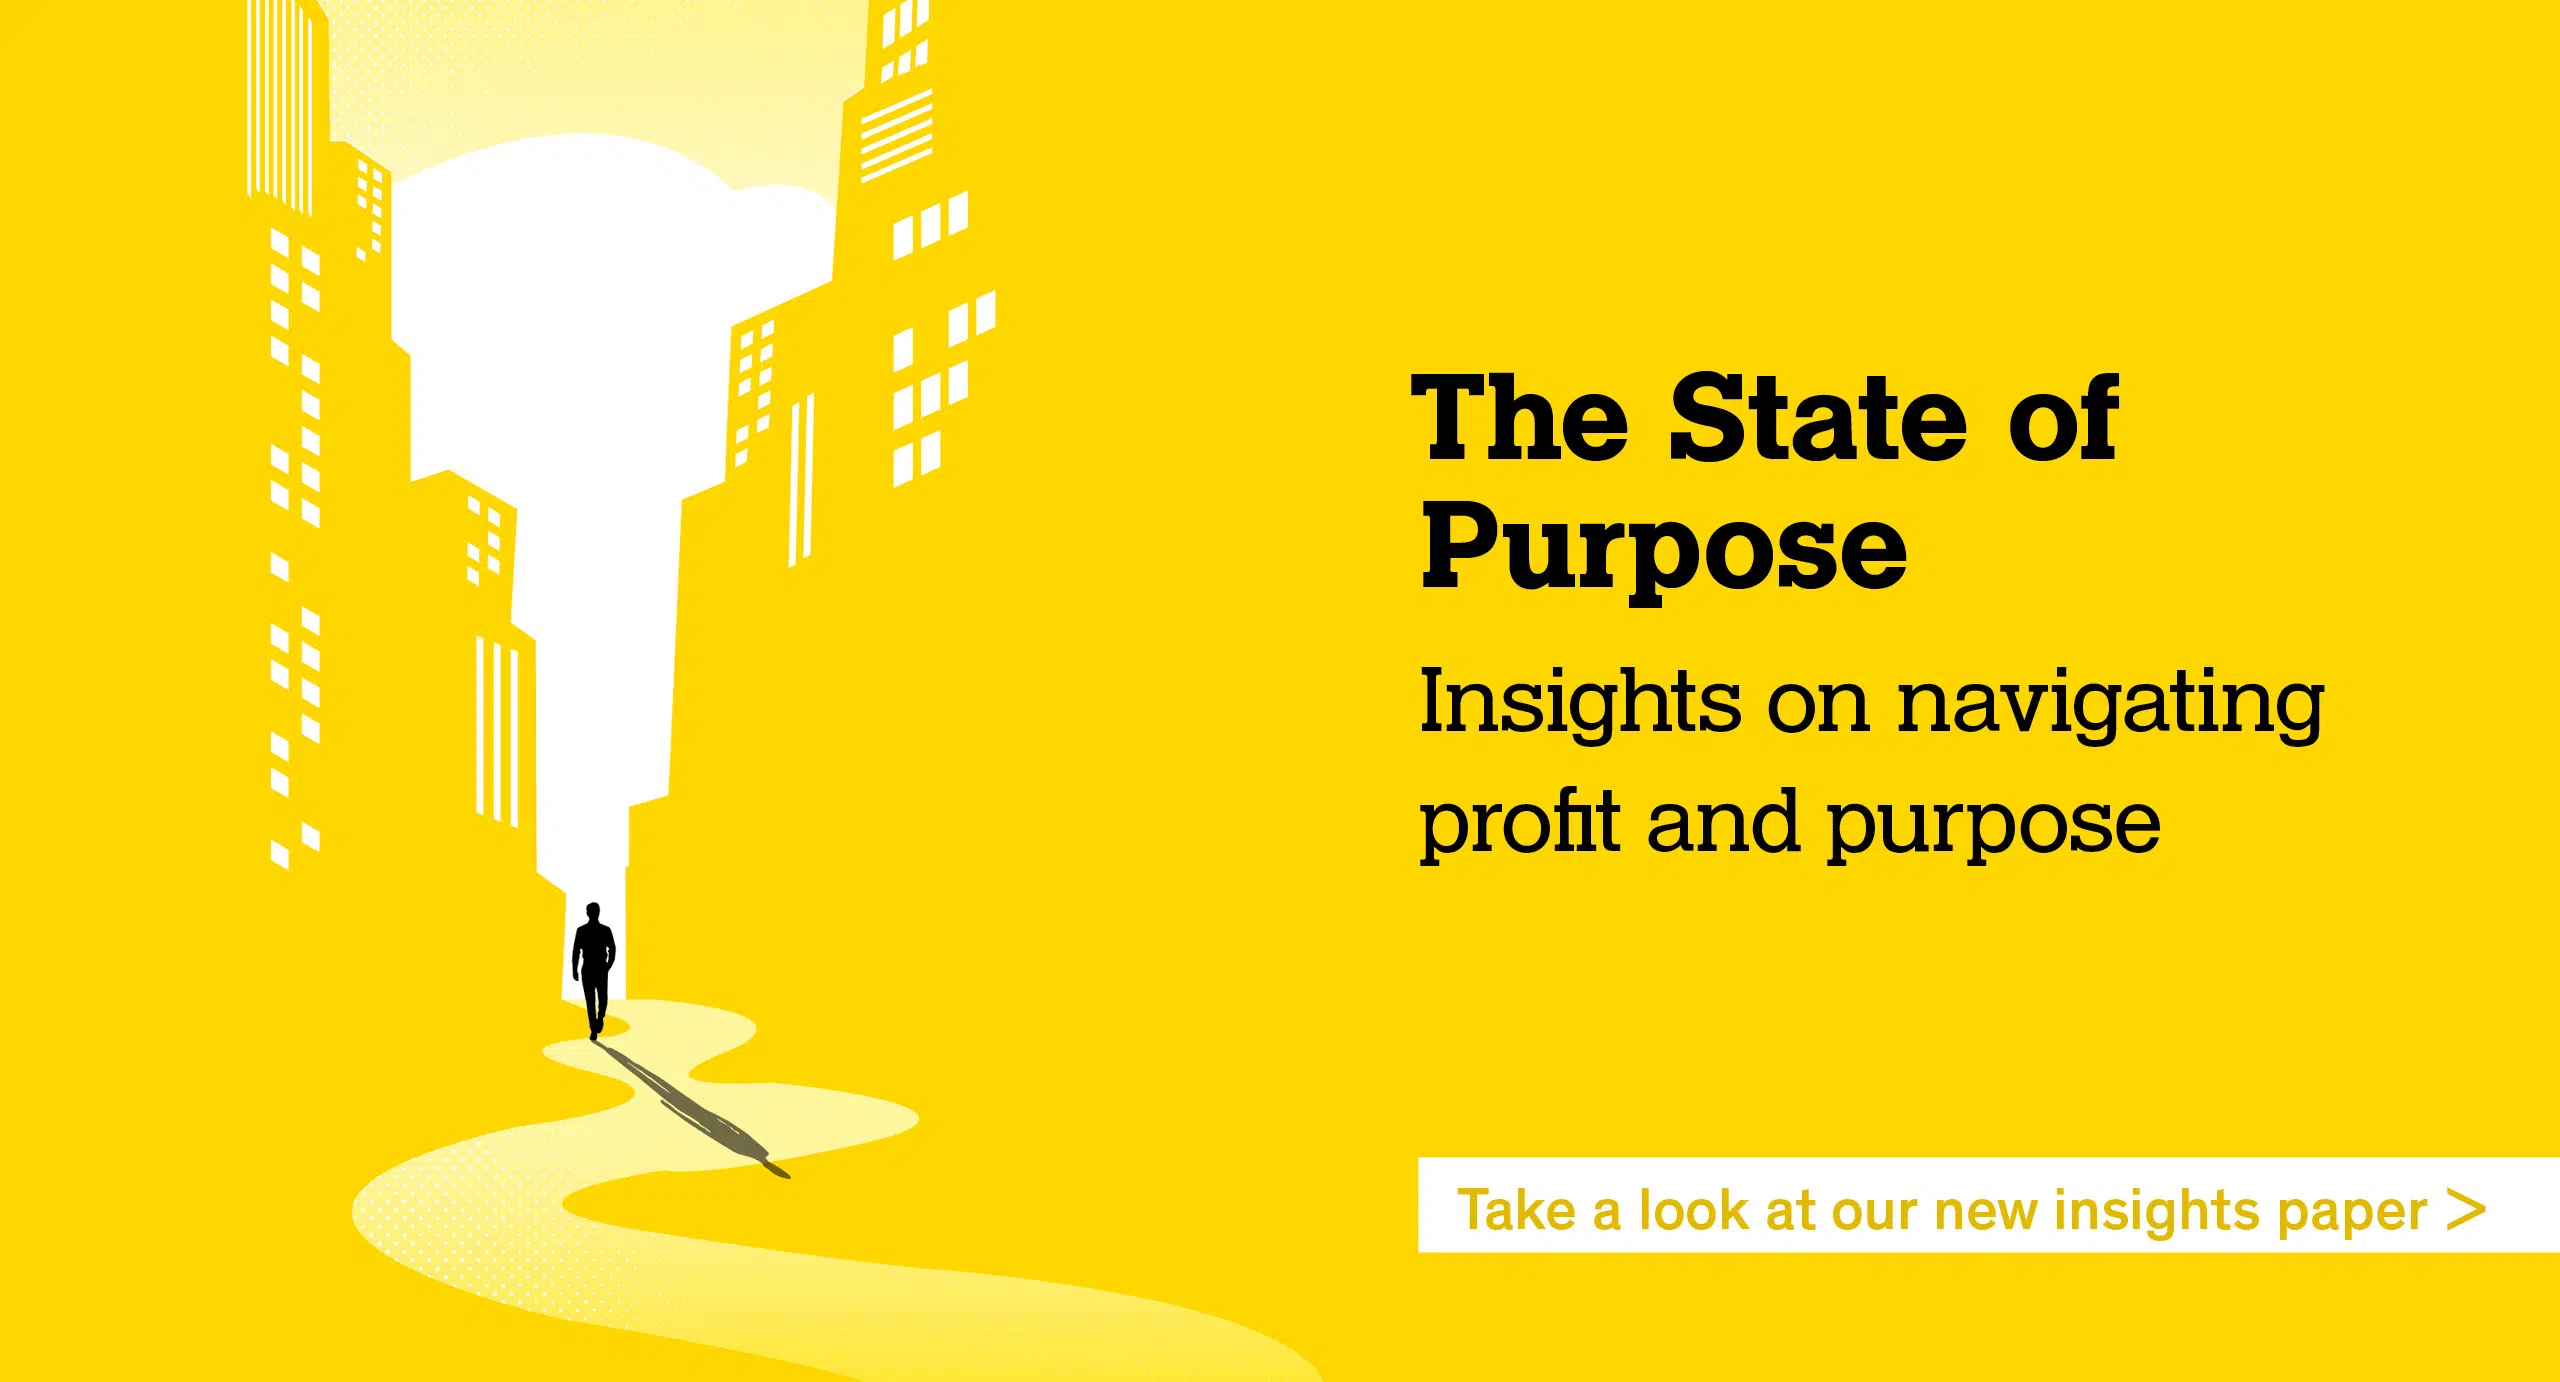 Yellow image with writing The State of Purpose Insights on navigating profit and purpose